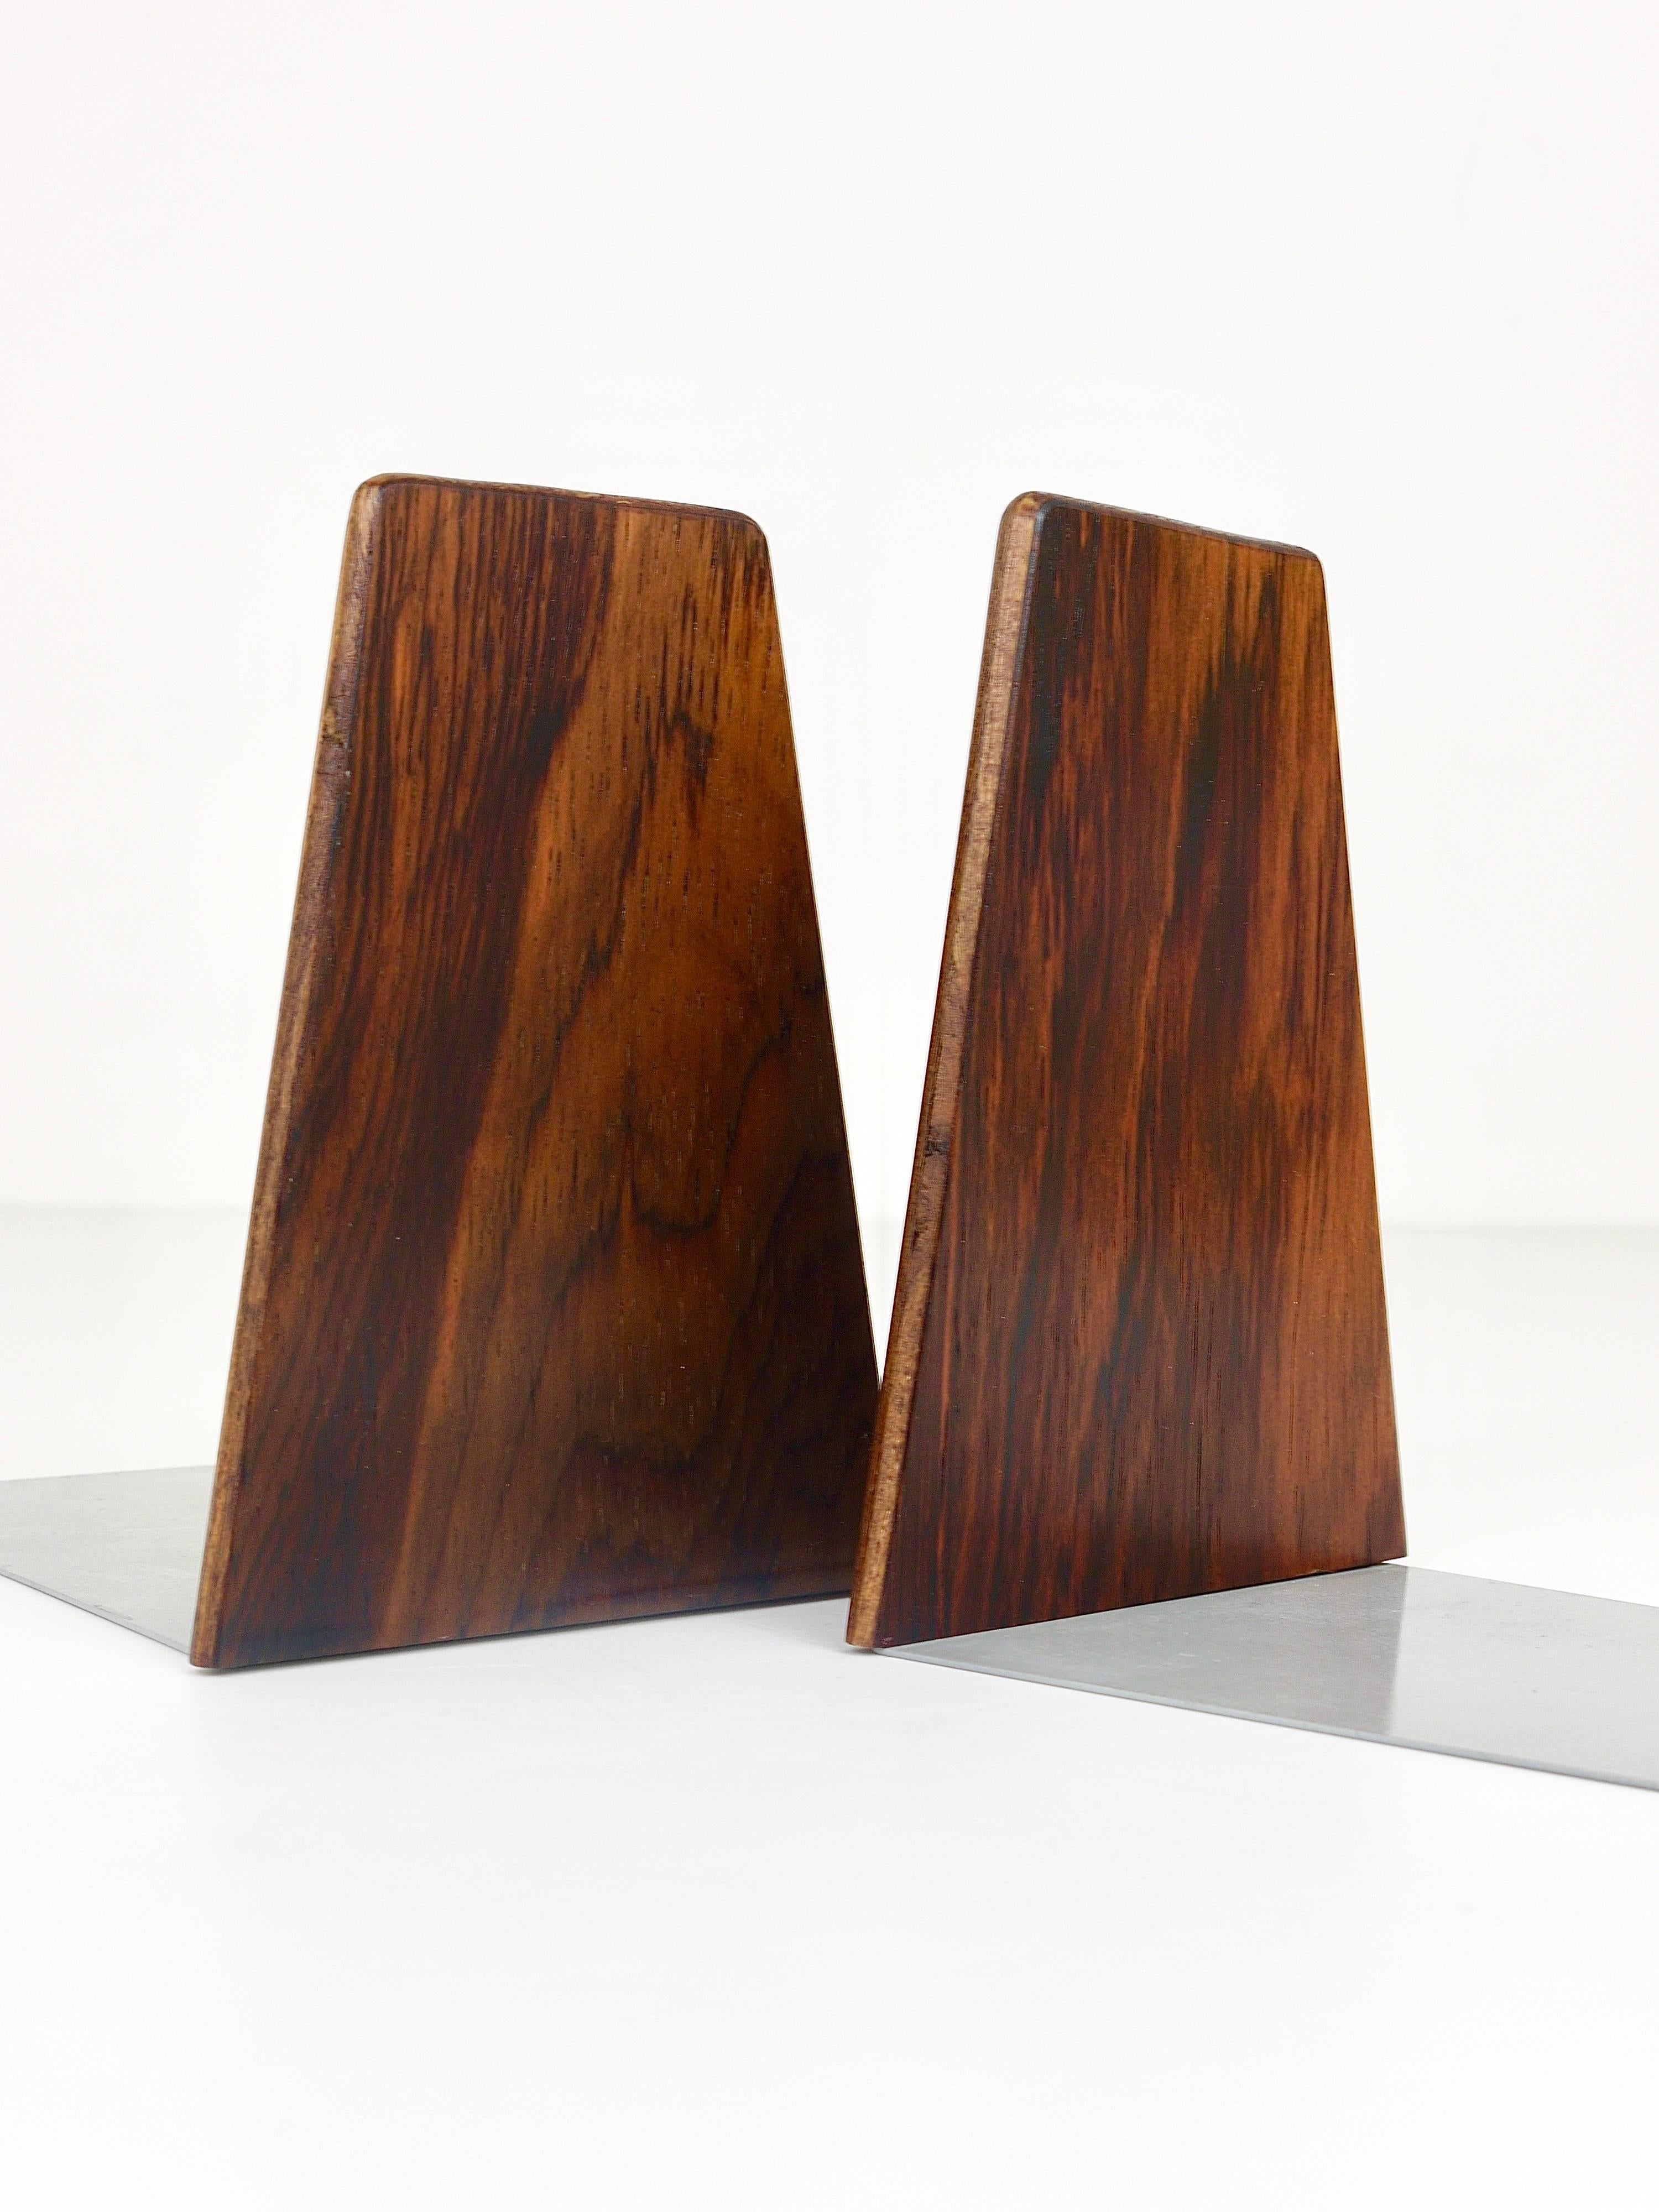 Pair Kai Kristiansen Danish Modern Metal & Wood Bookends, Denmark, 1960s In Good Condition For Sale In Vienna, AT